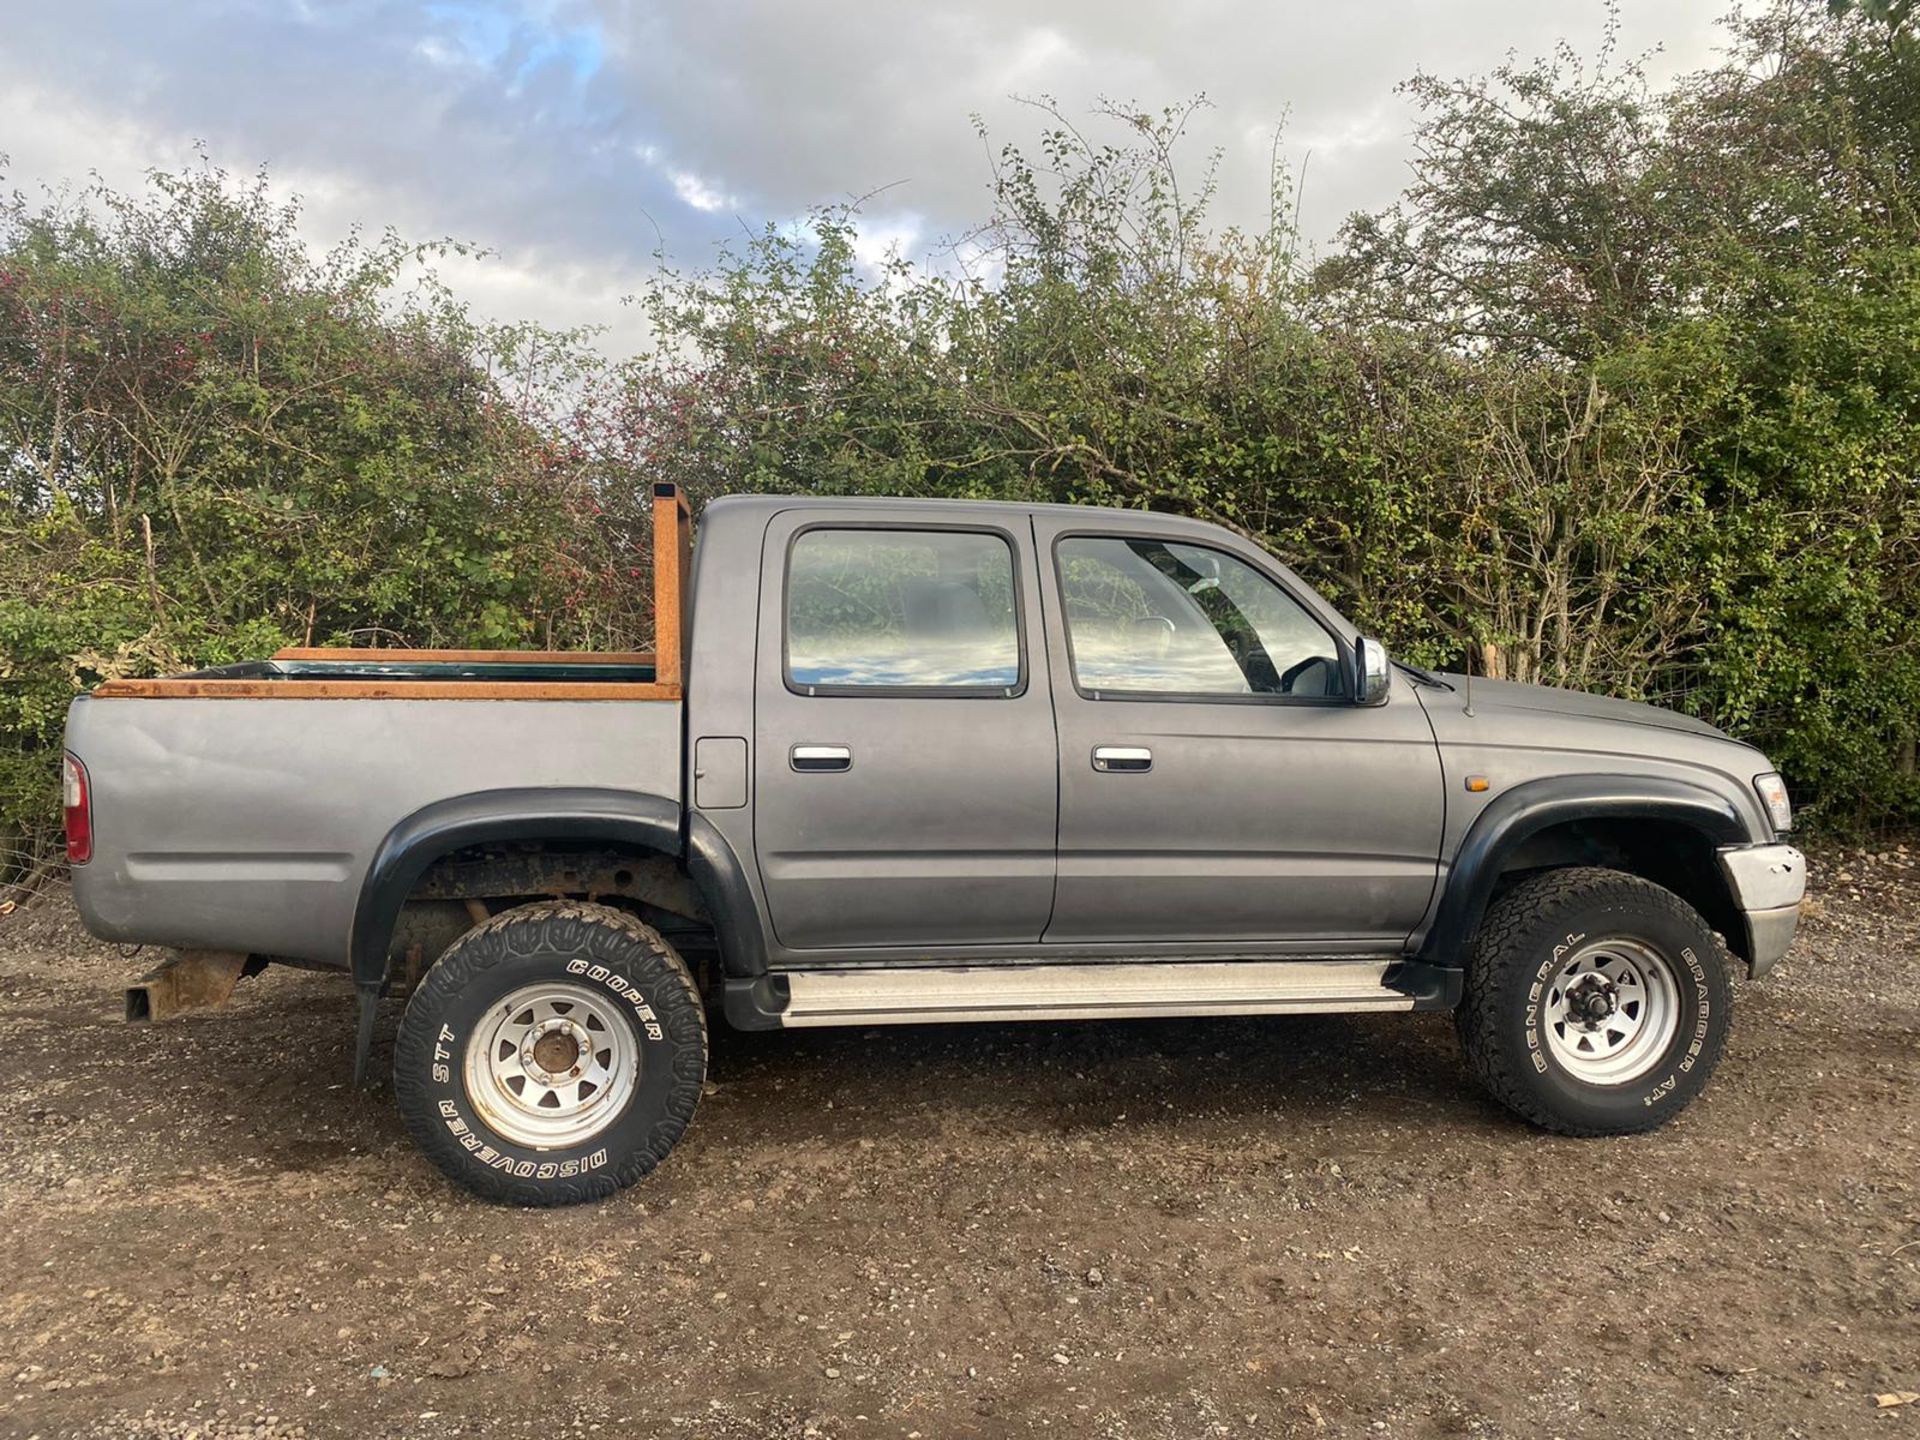 2004 TOYOTA HILUX 4X4 PICK UP.LOCATION NORTH YORKSHIRE.